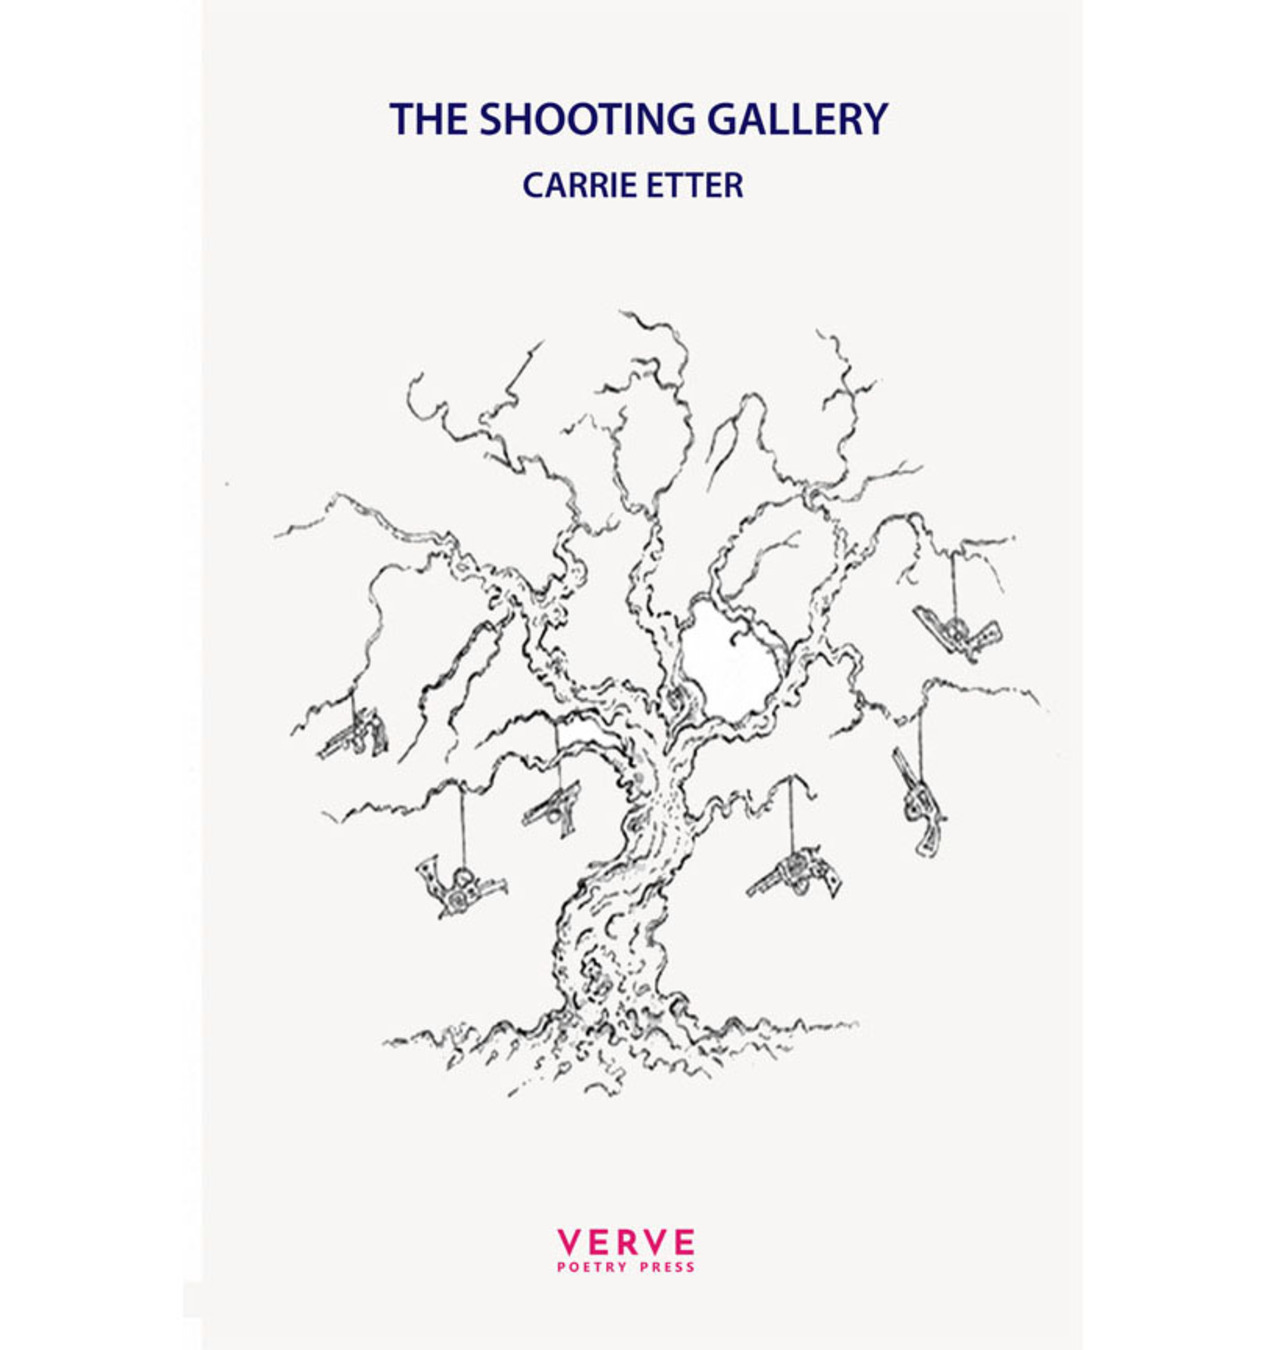 “The Shooting Gallery” Carrie Etter (Verve Poetry Press) – book review